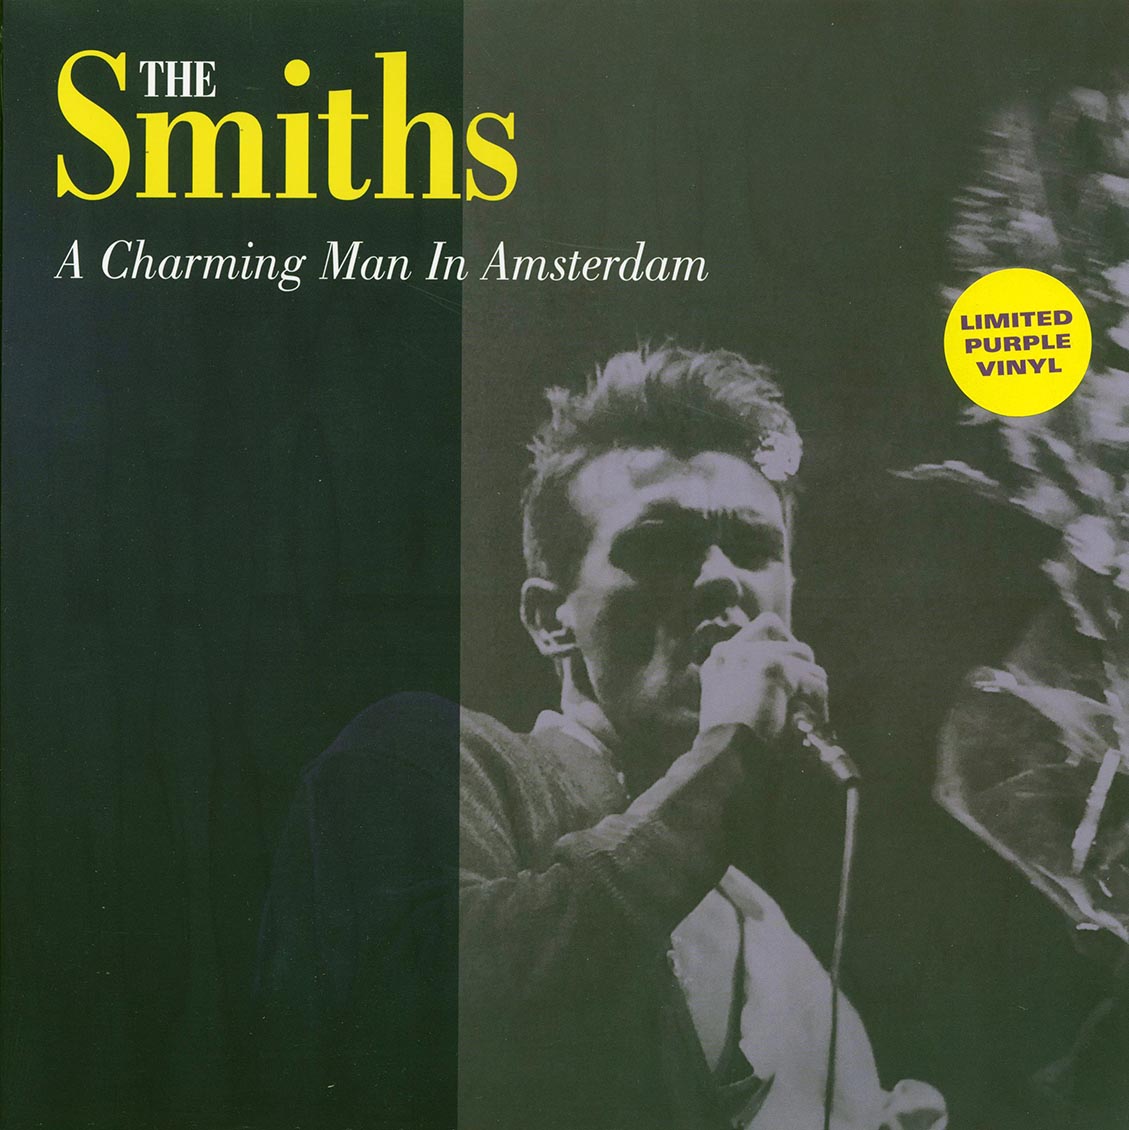 The Smiths - A Charming Man In Amsterdam: De Meervaart Hall, 21-04-84